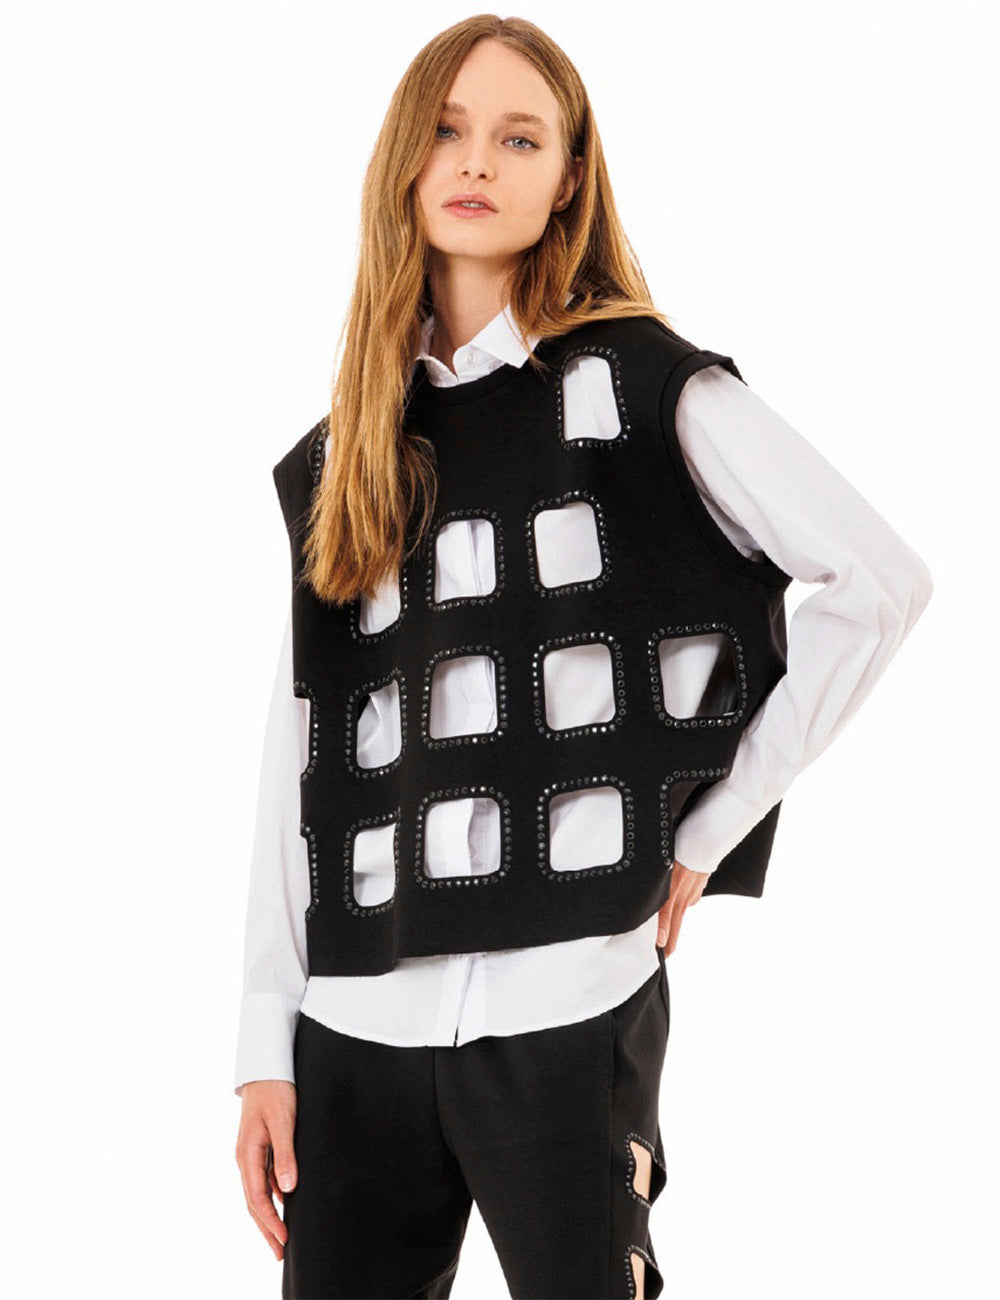 Shirt with perforated vest